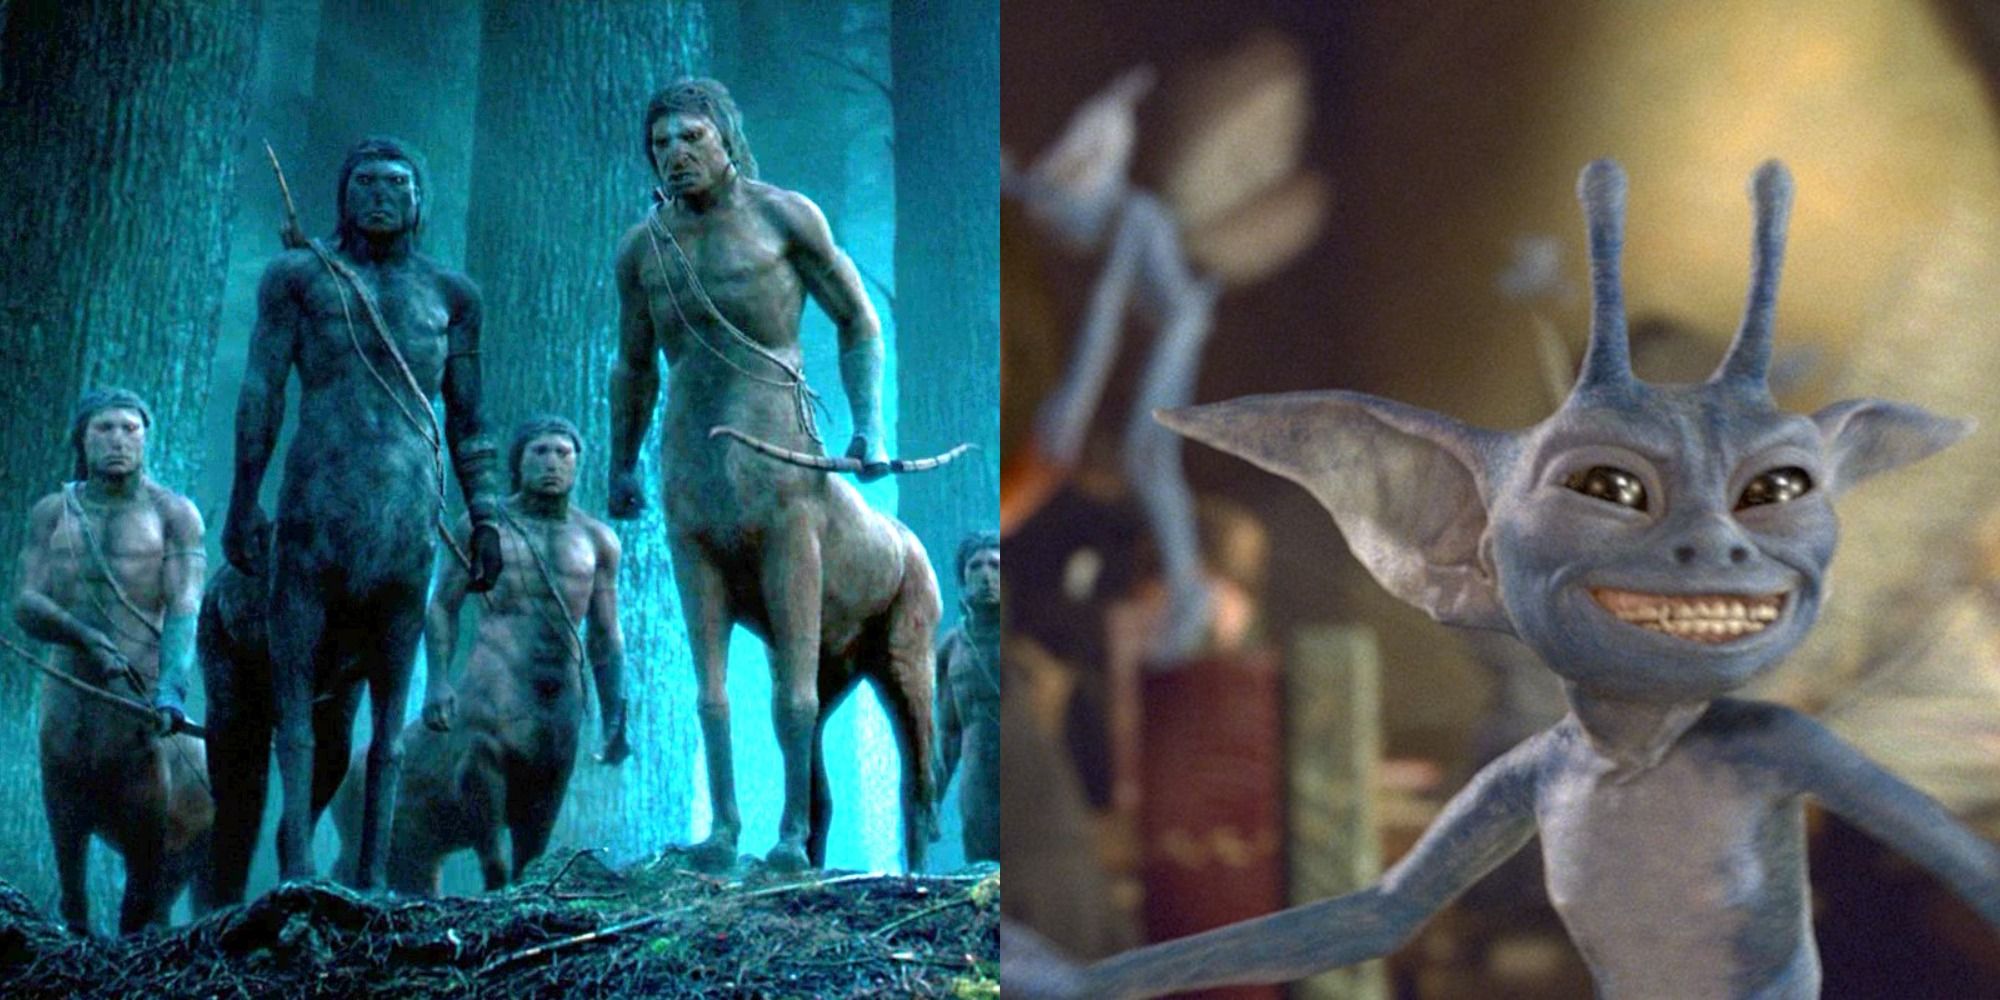 5 Harry Potter Creatures Inspired By Mythology (& 5 Invented For The Franchise)